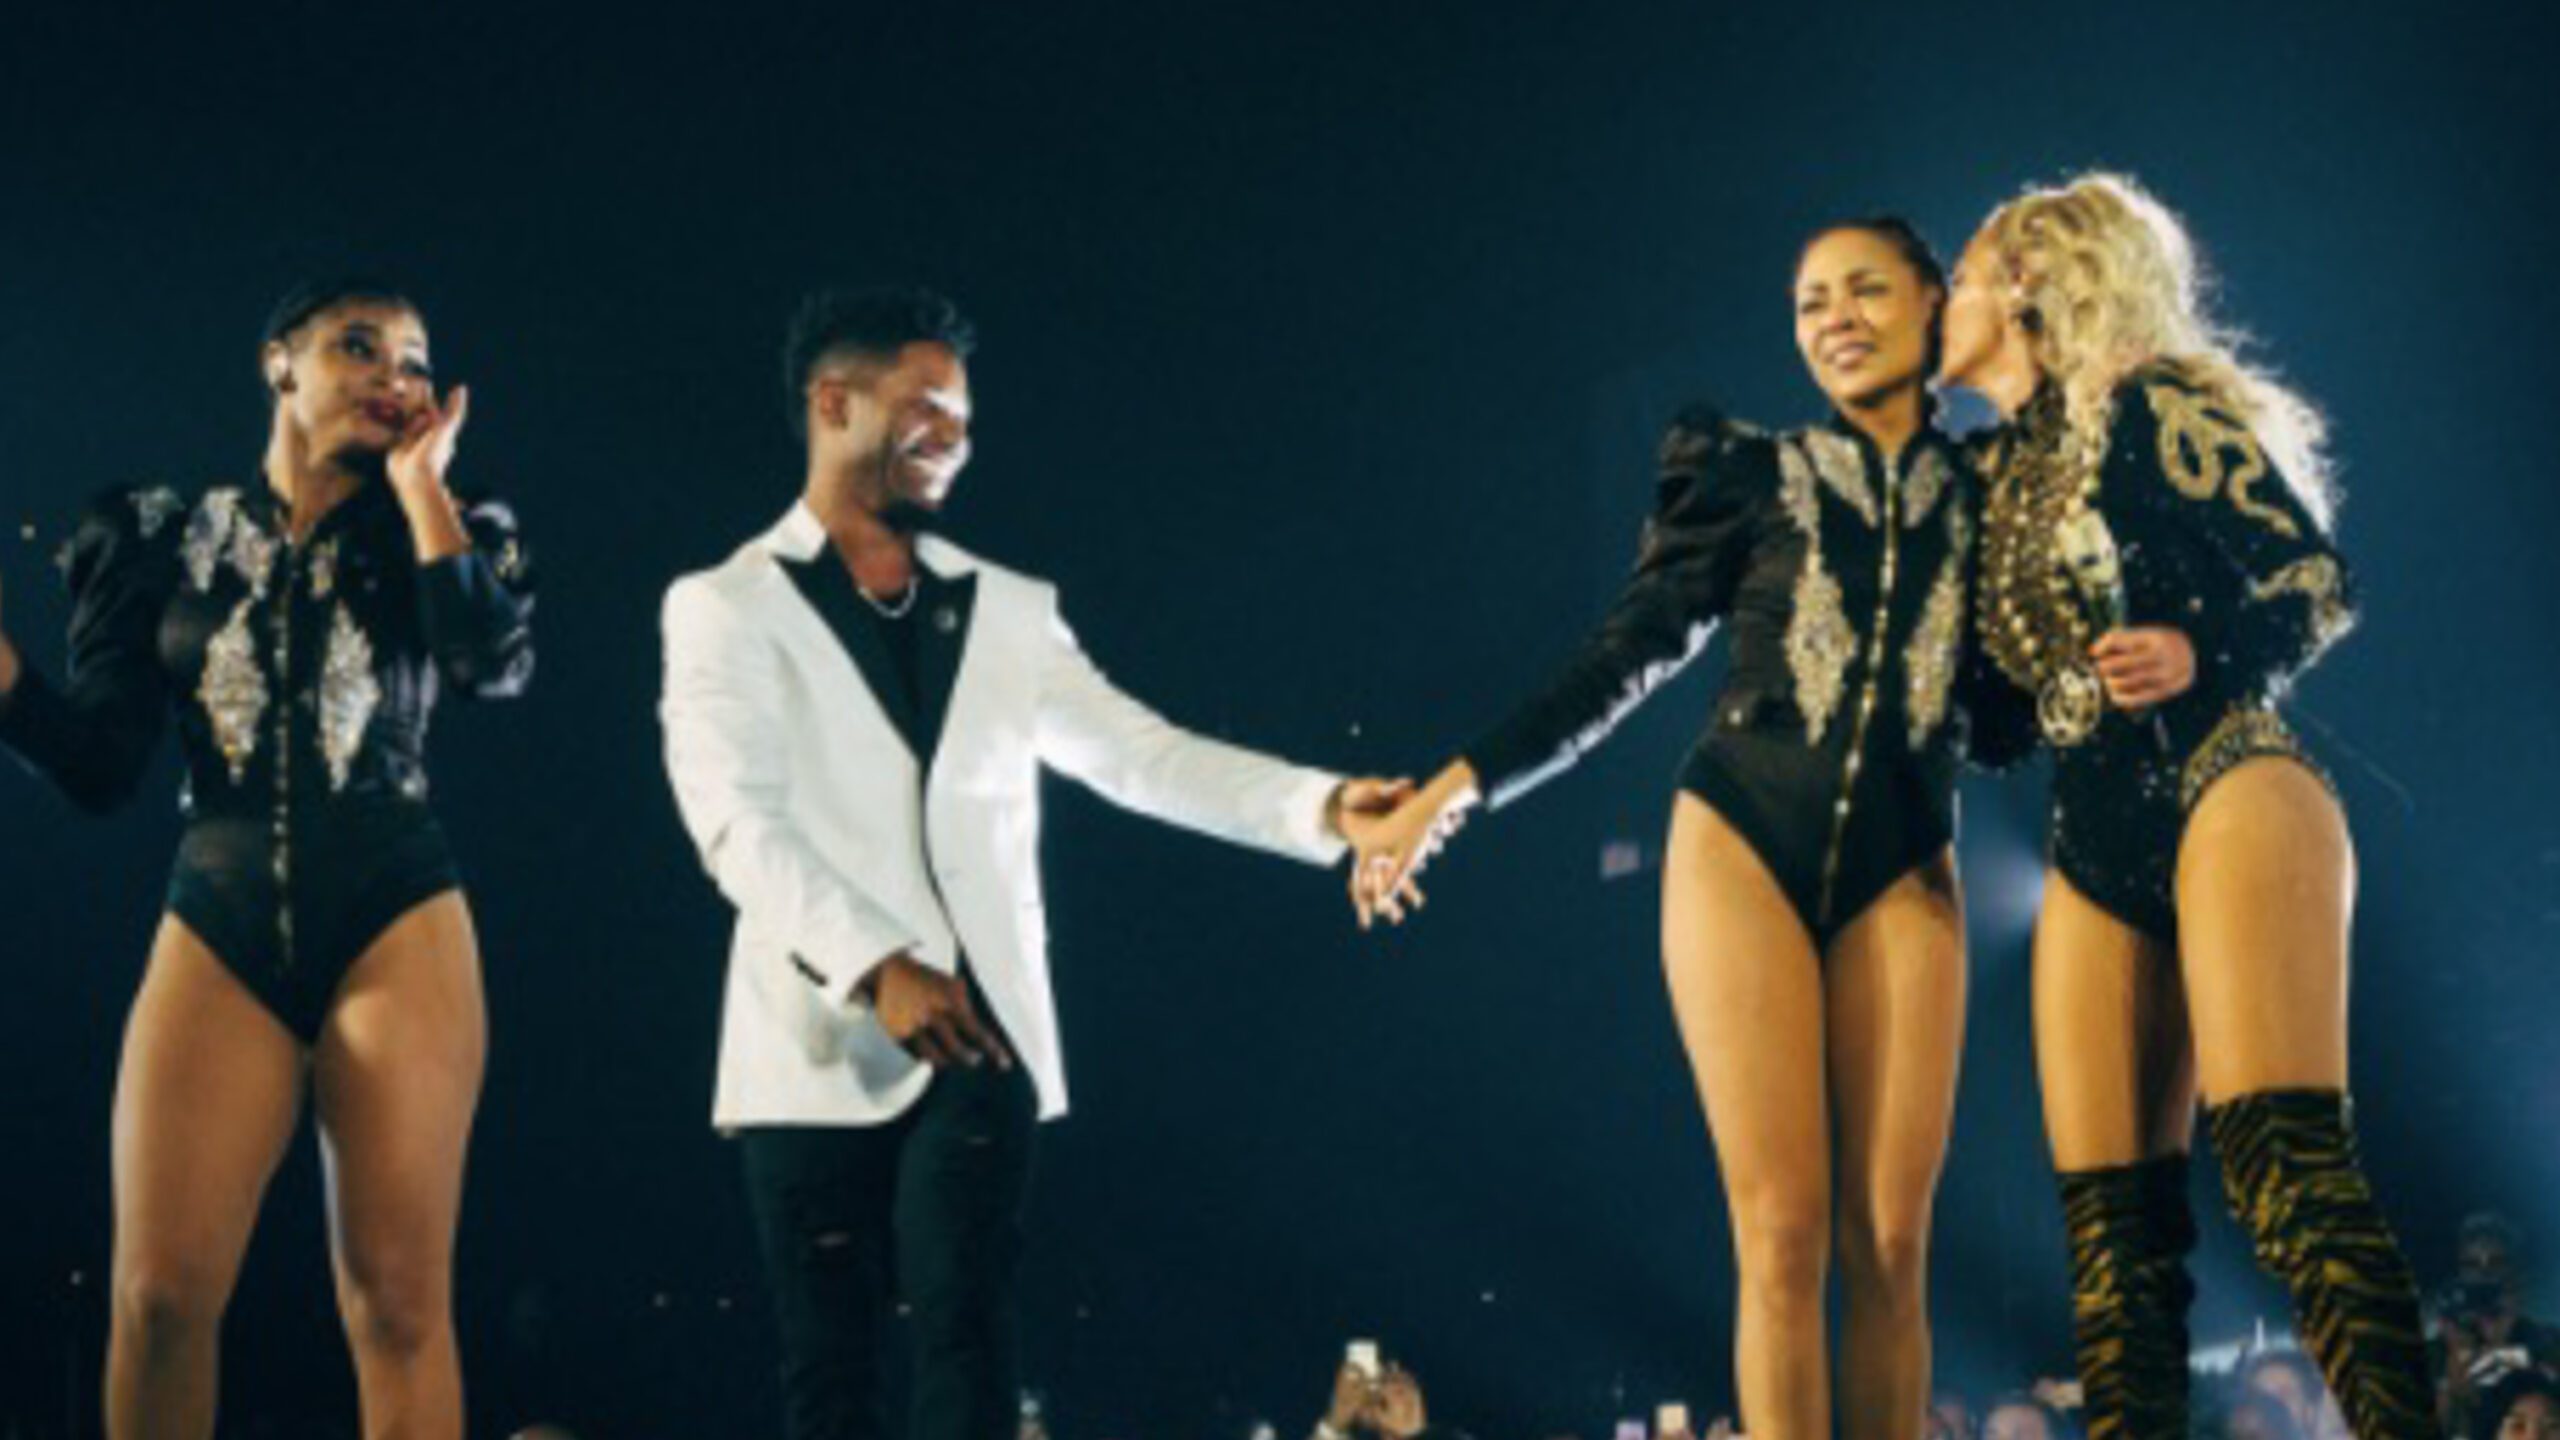 WATCH: Beyonce pauses ‘Single Ladies’ to help this couple get engaged